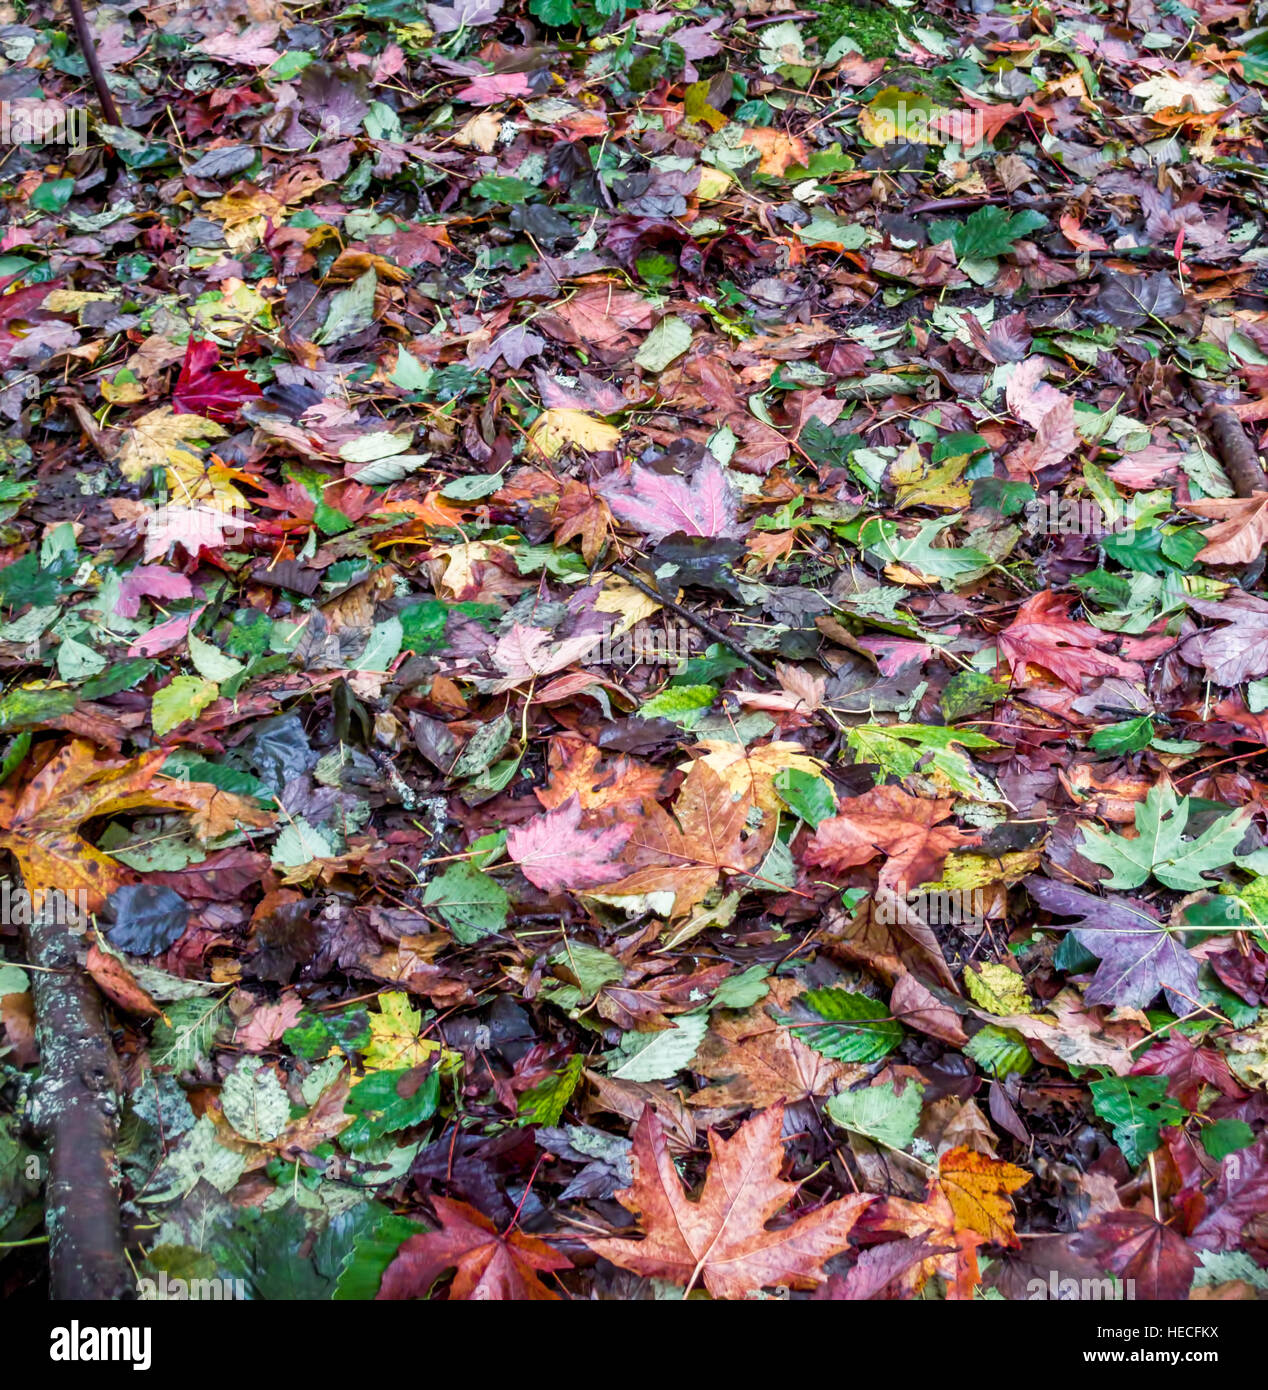 Colorful fall leaves cover the ground. Stock Photo